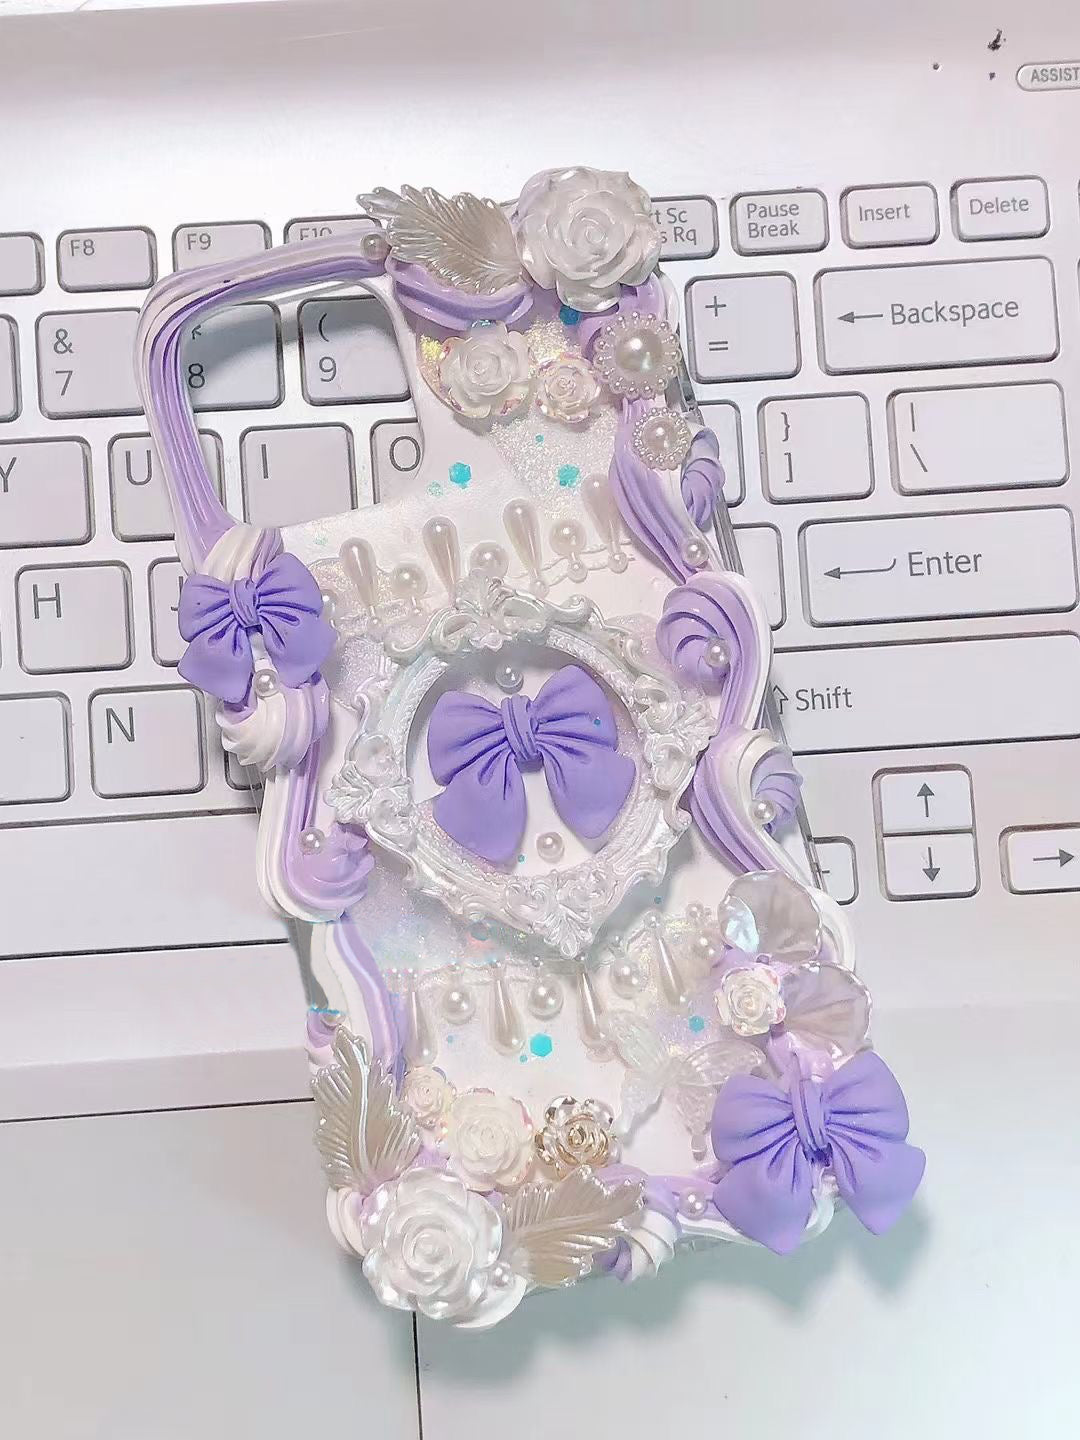 Blue Bow Decoden Phone Case DIY Kit, Baroque Style Decoden Case Starter  Package, Fake Cream Phone Case for Samsung, Apple, Android